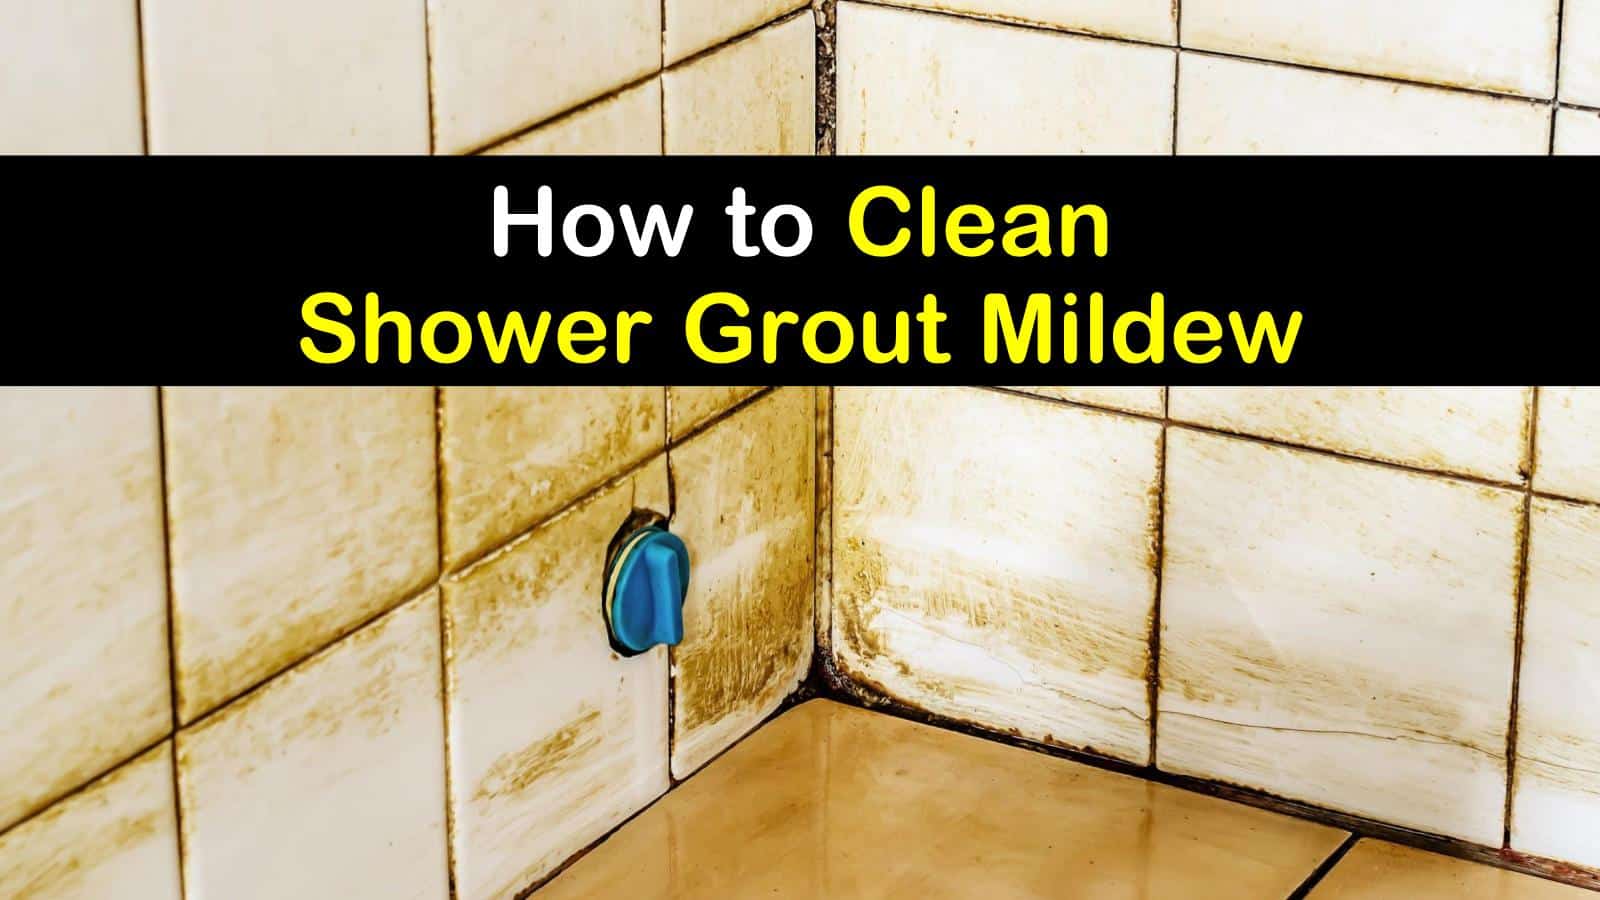 How to Clean Shower Grout Mildew Using Everyday Household Cleaners